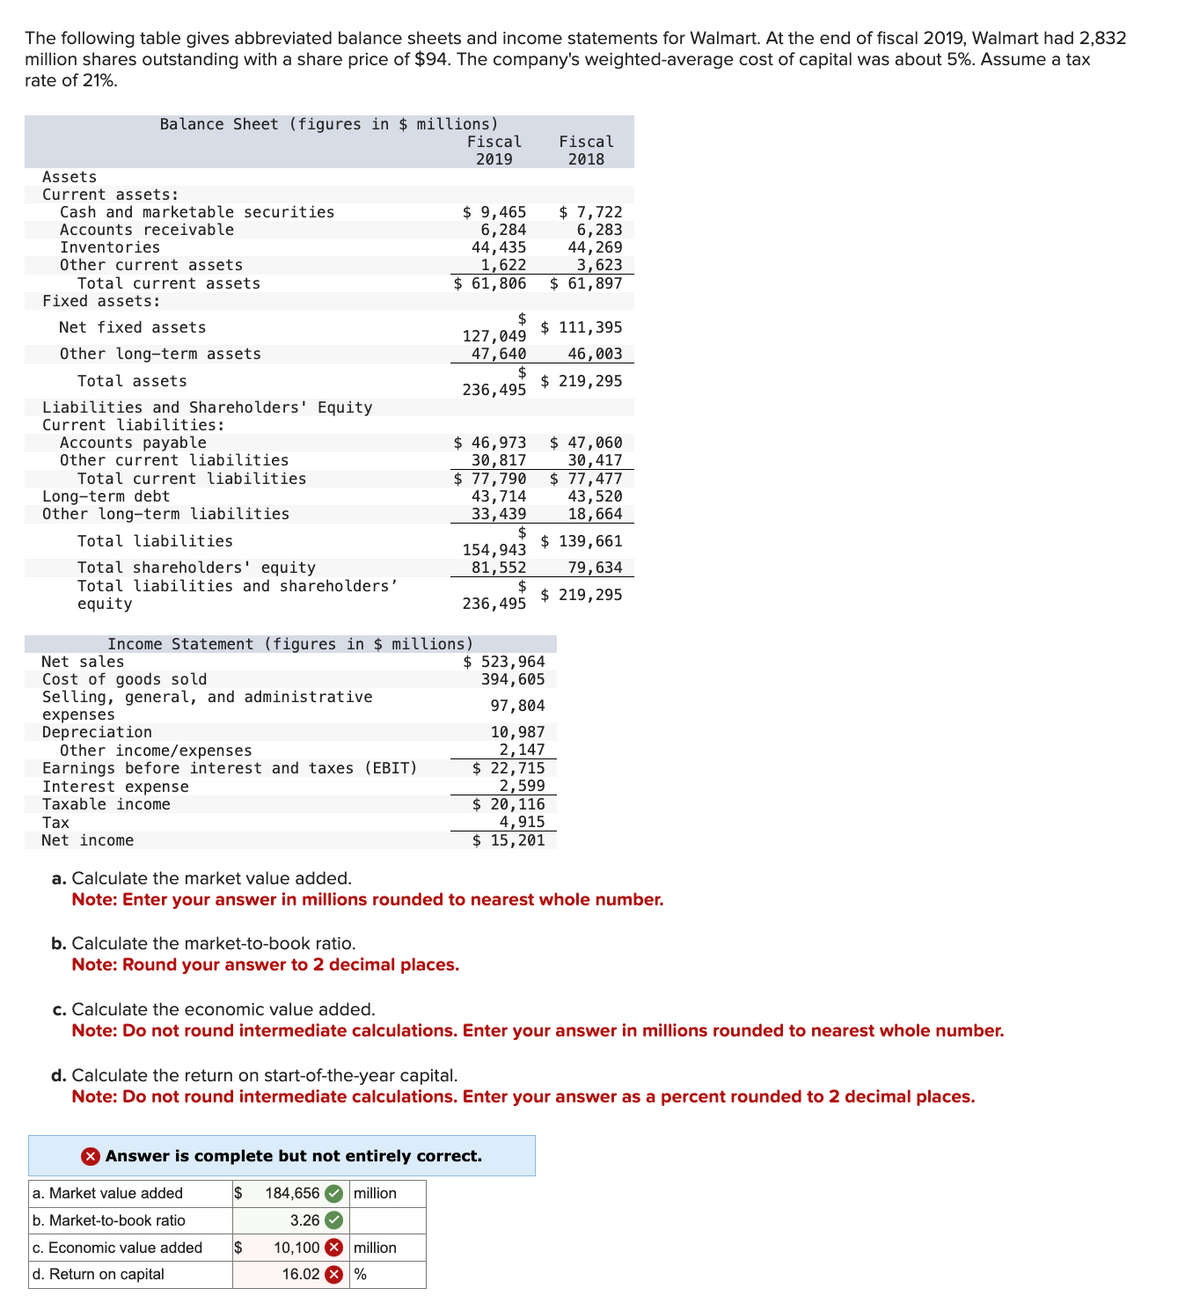 The following table gives abbreviated balance sheets and income statements for Walmart. At the end of fiscal 2019, Walmart had 2,832
million shares outstanding with a share price of $94. The company's weighted-average cost of capital was about 5%. Assume a tax
rate of 21%.
Assets
Current assets:
Cash and marketable securities
Accounts receivable
Inventories
Balance Sheet (figures in $ millions)
Fiscal
2019
Other current assets
Total current assets
Fixed assets:
Net fixed assets
Other long-term assets
Total assets
ies and Shareholders' Equity
Current liabilities:
Accounts payable
Other current liabilities
Total current liabilities
Long-term debt
Other long-term liabilities
Total liabilities
Total shareholders' equity
Total liabilities and shareholders'
equity
Net sales
Cost of goods sold
Selling, general, and administrative
expenses
Depreciation
Other income/expenses
Earnings before interest and taxes (EBIT)
Interest expense
Taxable income
Tax
Net income
Income Statement (figures in $ millions)
b. Calculate the market-to-book ratio.
Note: Round your answer to 2 decimal places.
$ 9,465
6,284
44,435
1,622
$ 7,722
6,283
44,269
3,623
$ 61,806 $ 61,897
a. Market value added
b. Market-to-book ratio
c. Economic value added
d. Return on capital
$
127,049
47,640
$
236,495
million
$
16.02 x %
$ 46,973 $ 47,060
30,817
$ 77,790
43,714
33,439
$
154,943
81,552
236,495
Answer is complete but not entirely correct.
$ 184,656 million
3.26
10,100
Fiscal
2018
$ 111,395
46,003
$ 219,295
a. Calculate the market value added.
Note: Enter your answer in millions rounded to nearest whole number.
$ 523,964
394, 605
$ 139,661
79,634
$ $ 219,295
97,804
10,987
2,147
$ 22,715
$
2,599
20,116
4,915
$ 15,201
c. Calculate the economic value added.
Note: Do not round intermediate calculations. Enter your answer in millions rounded to nearest whole number.
d. Calculate the return on start-of-the-year capital.
Note: Do not round intermediate calculations. Enter your answer as a percent rounded to 2 decimal places.
30,417
$ 77,477
43,520
18, 664